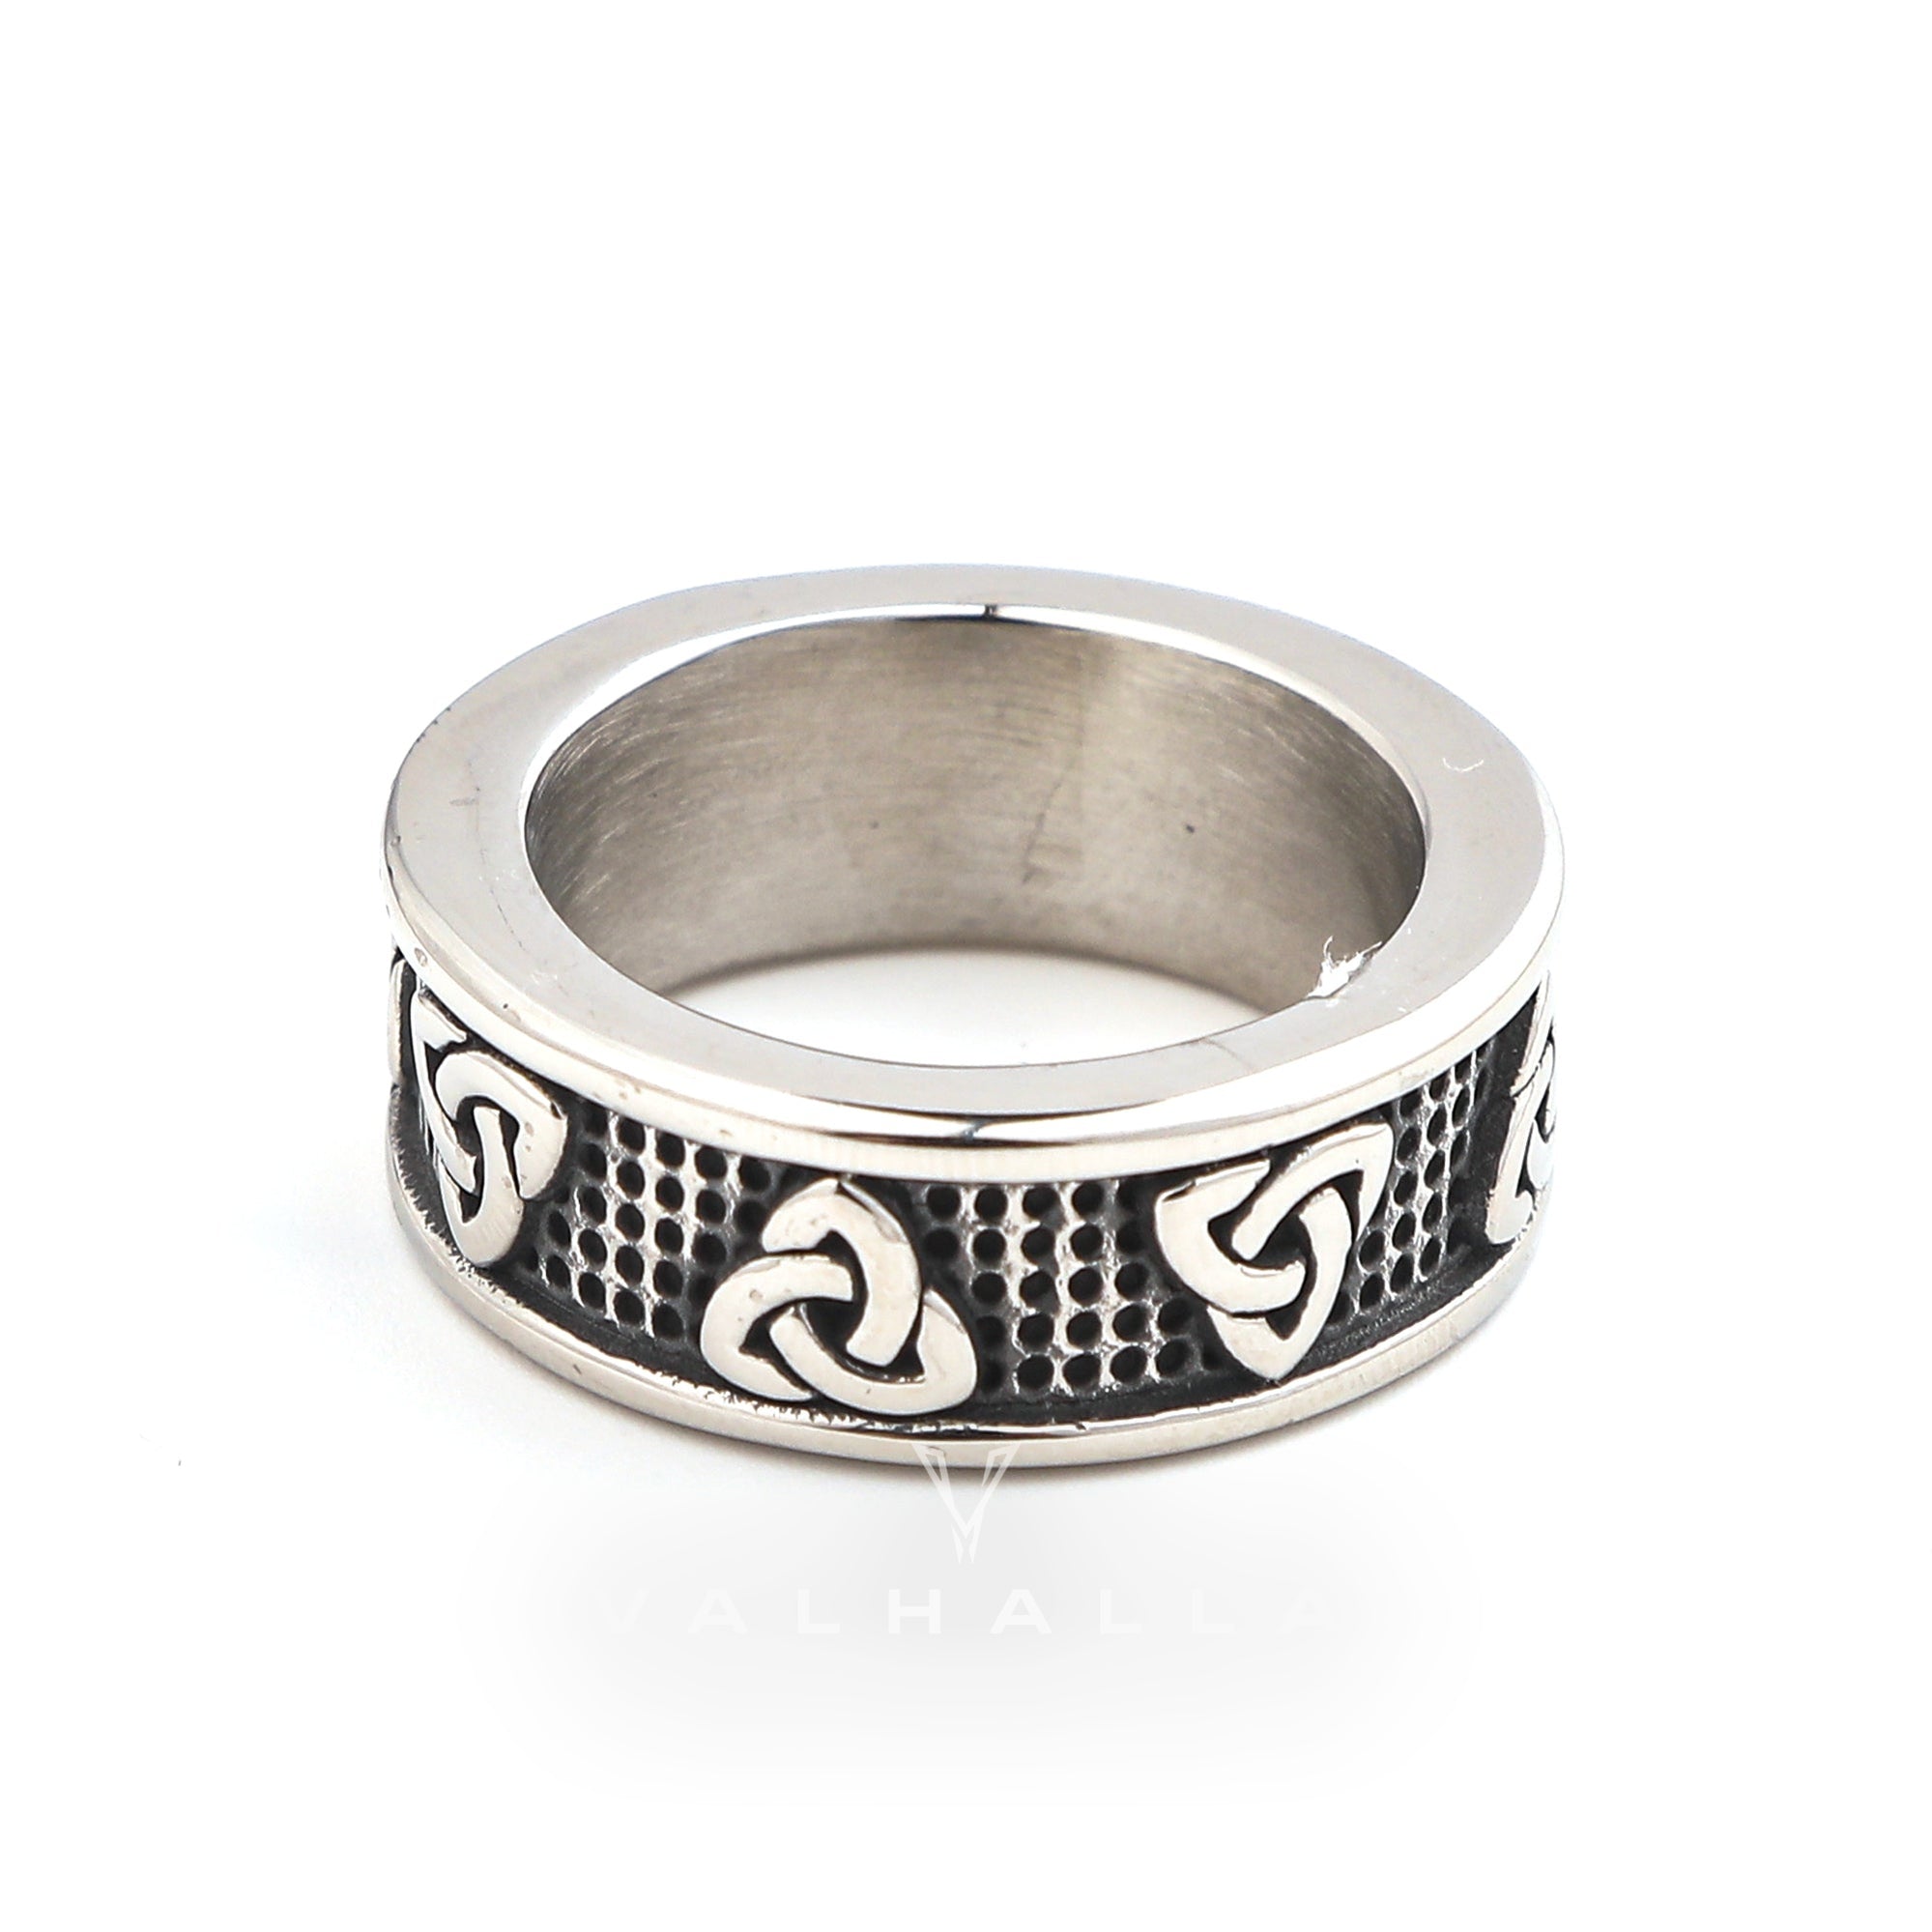 Handcrafted Stainless Steel Celtic Triquetra Band Ring